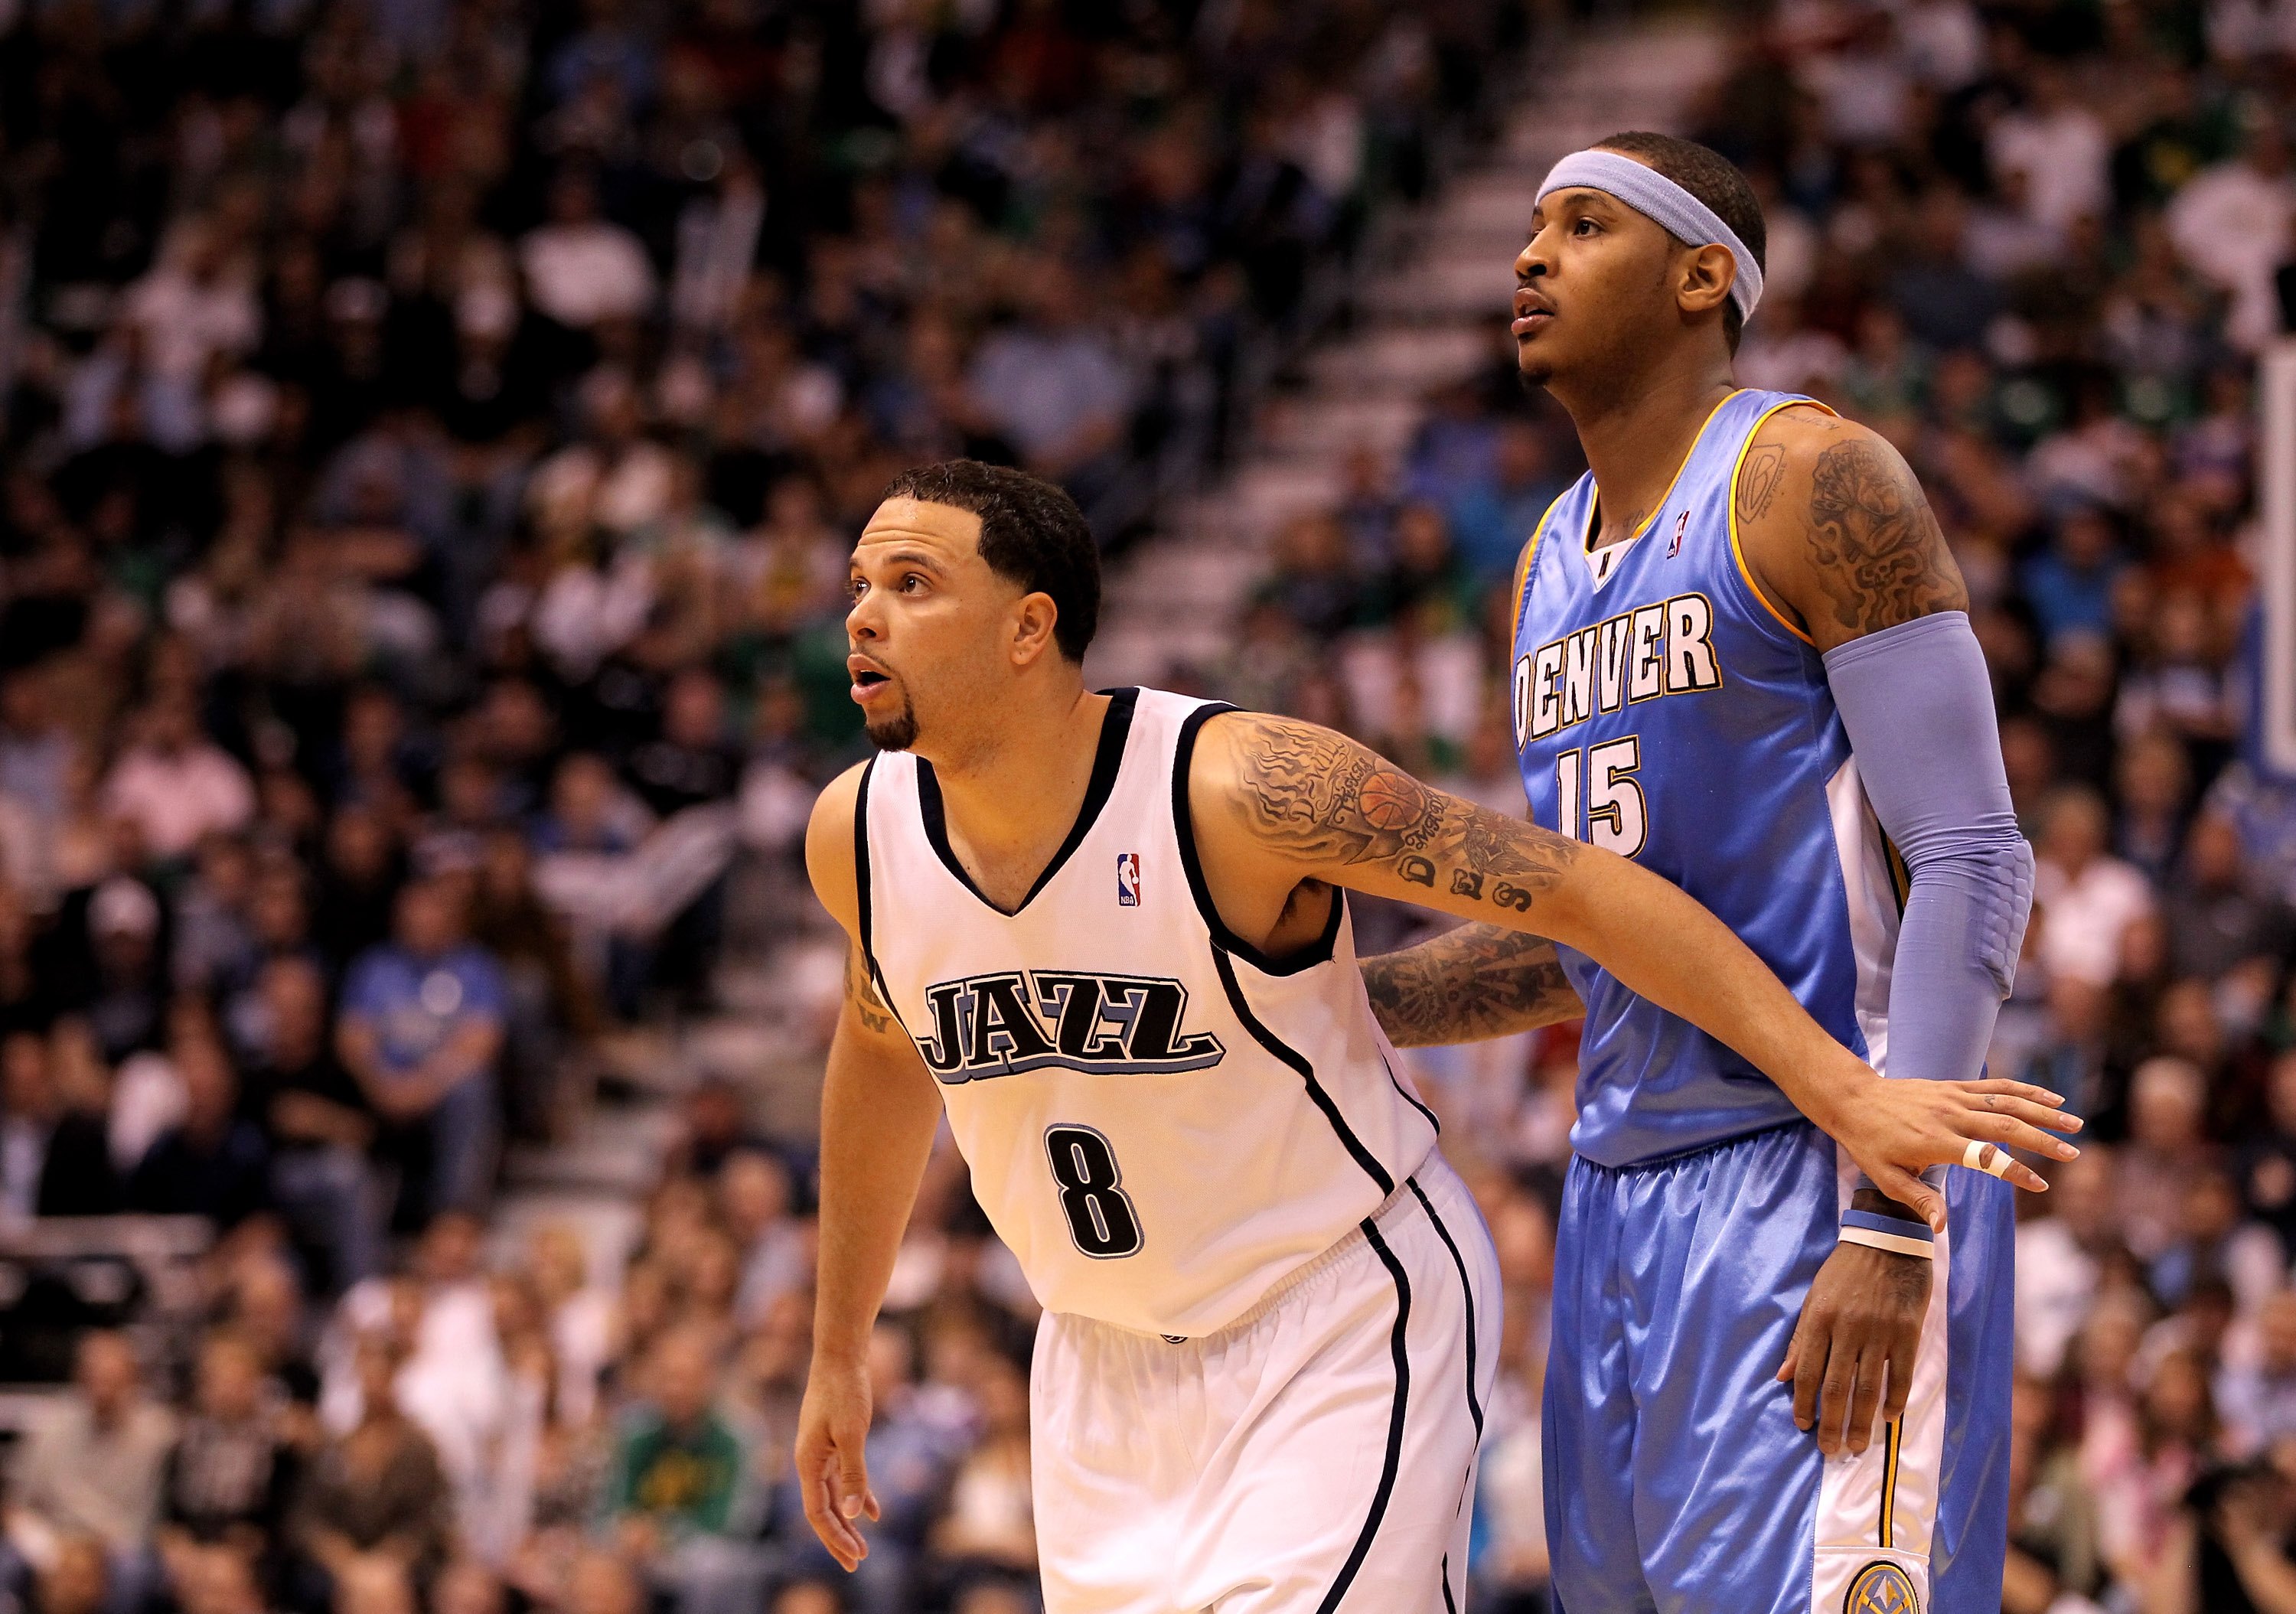 The Issue Between Deron Williams and Jerry Sloan: Sideburns